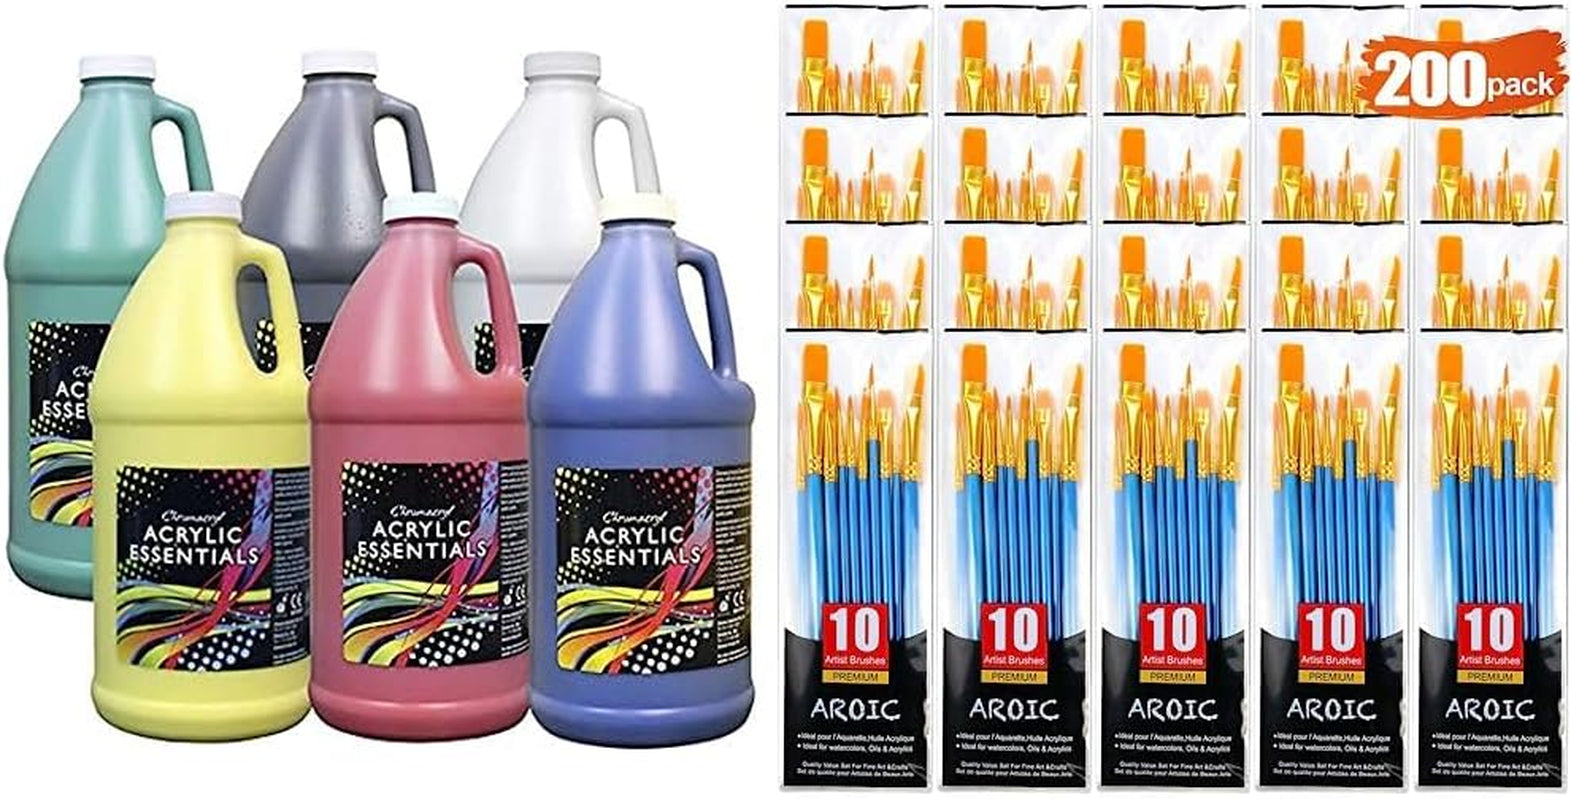 Acrylic Essential Set, 1/2 Gallon Jugs, Assorted Primary Colors, Set of 6 - 59001